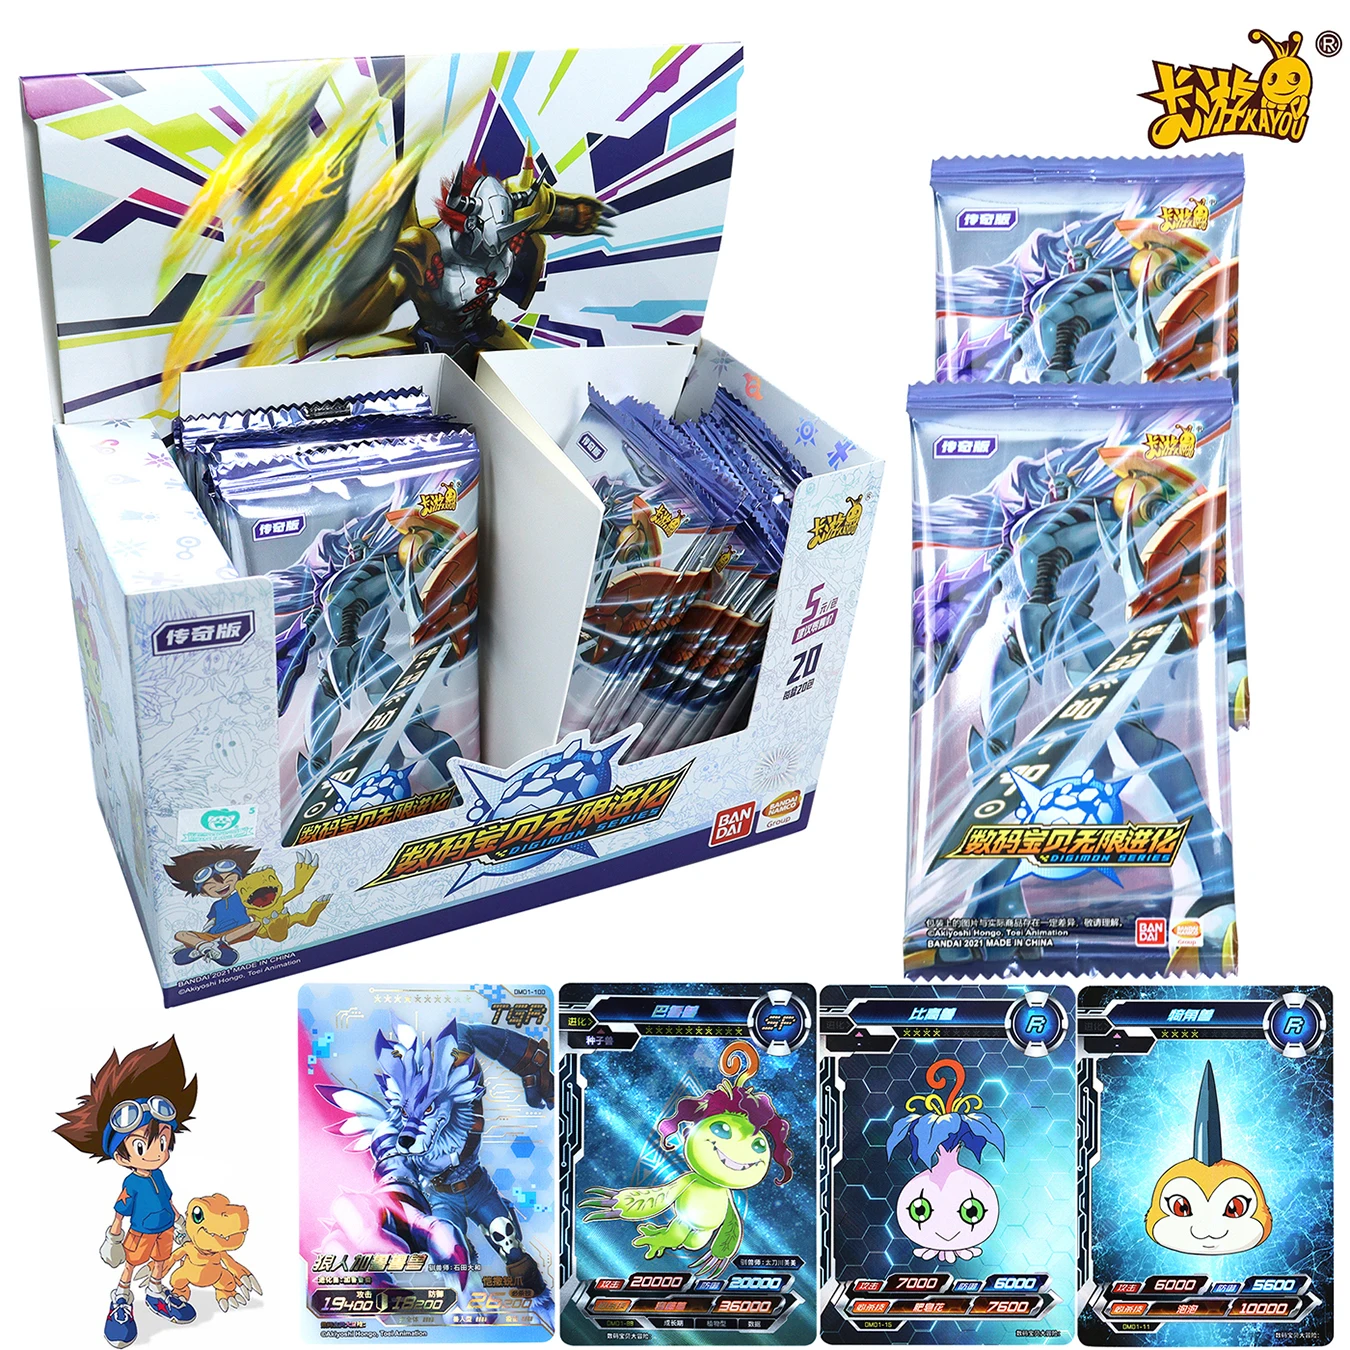 

KAYOU New Original Digimon Adventure Game Legendary Edition Cards Anime Peripheral Collection TGR Transparent Card Kids Toy Gift